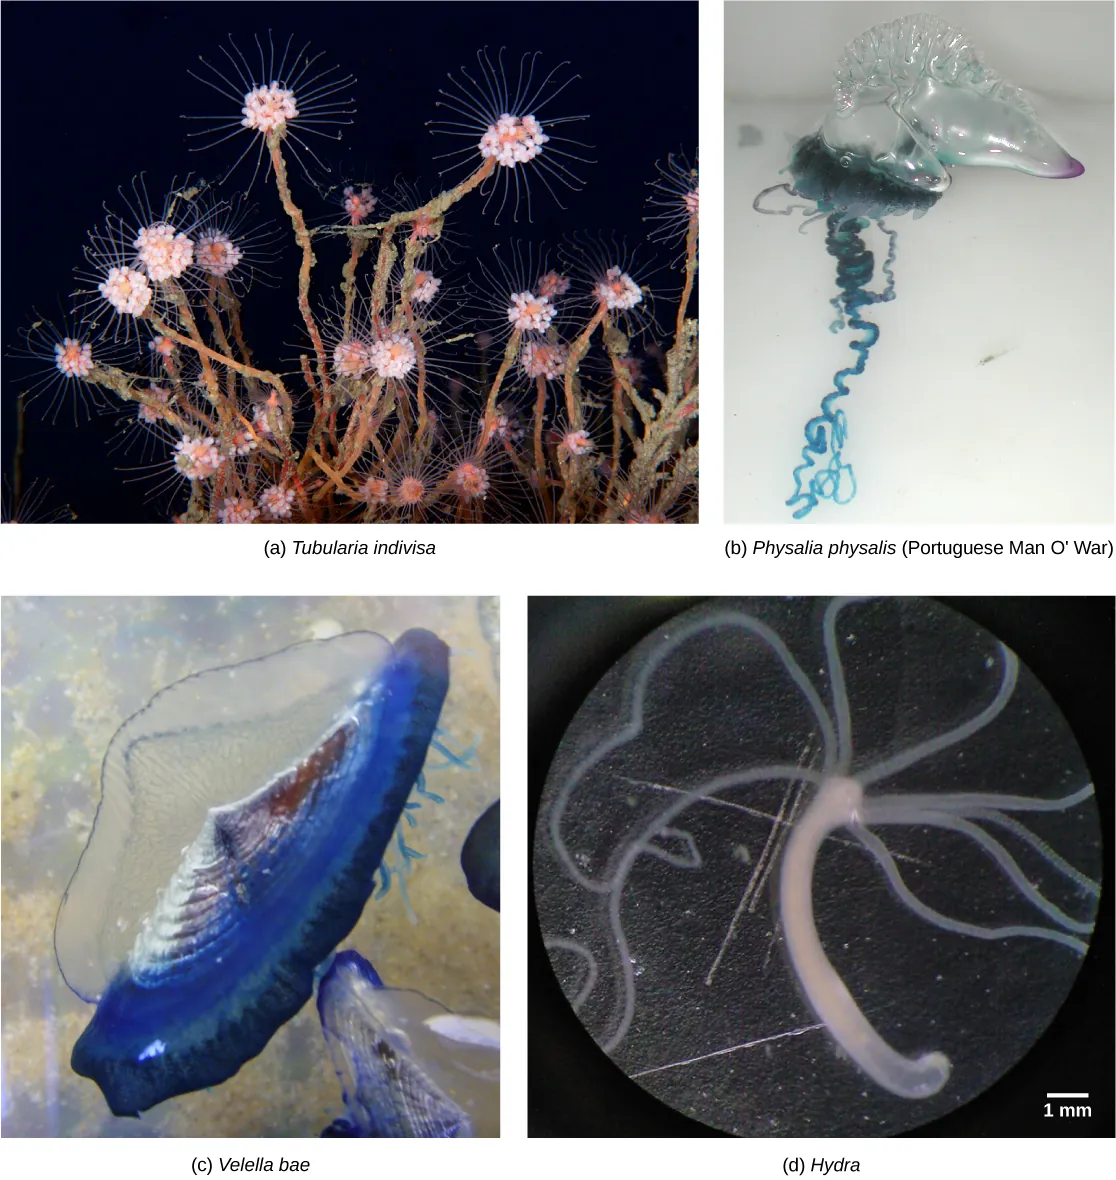 Photo a shows Tubularia indivisa, which has a body composed of branching polyps. Photo b shows a Portuguese Man O War, which has ribbon-like tentacles dangling from a clear, bulbous structure, resembling an inflated plastic bag. Photo c shows Velella bae, which resembles a flying saucer with a blue bottom and a clear, dome-shaped top. Photo d shows a hydra with long tentacles, extending from a tube-shaped body.